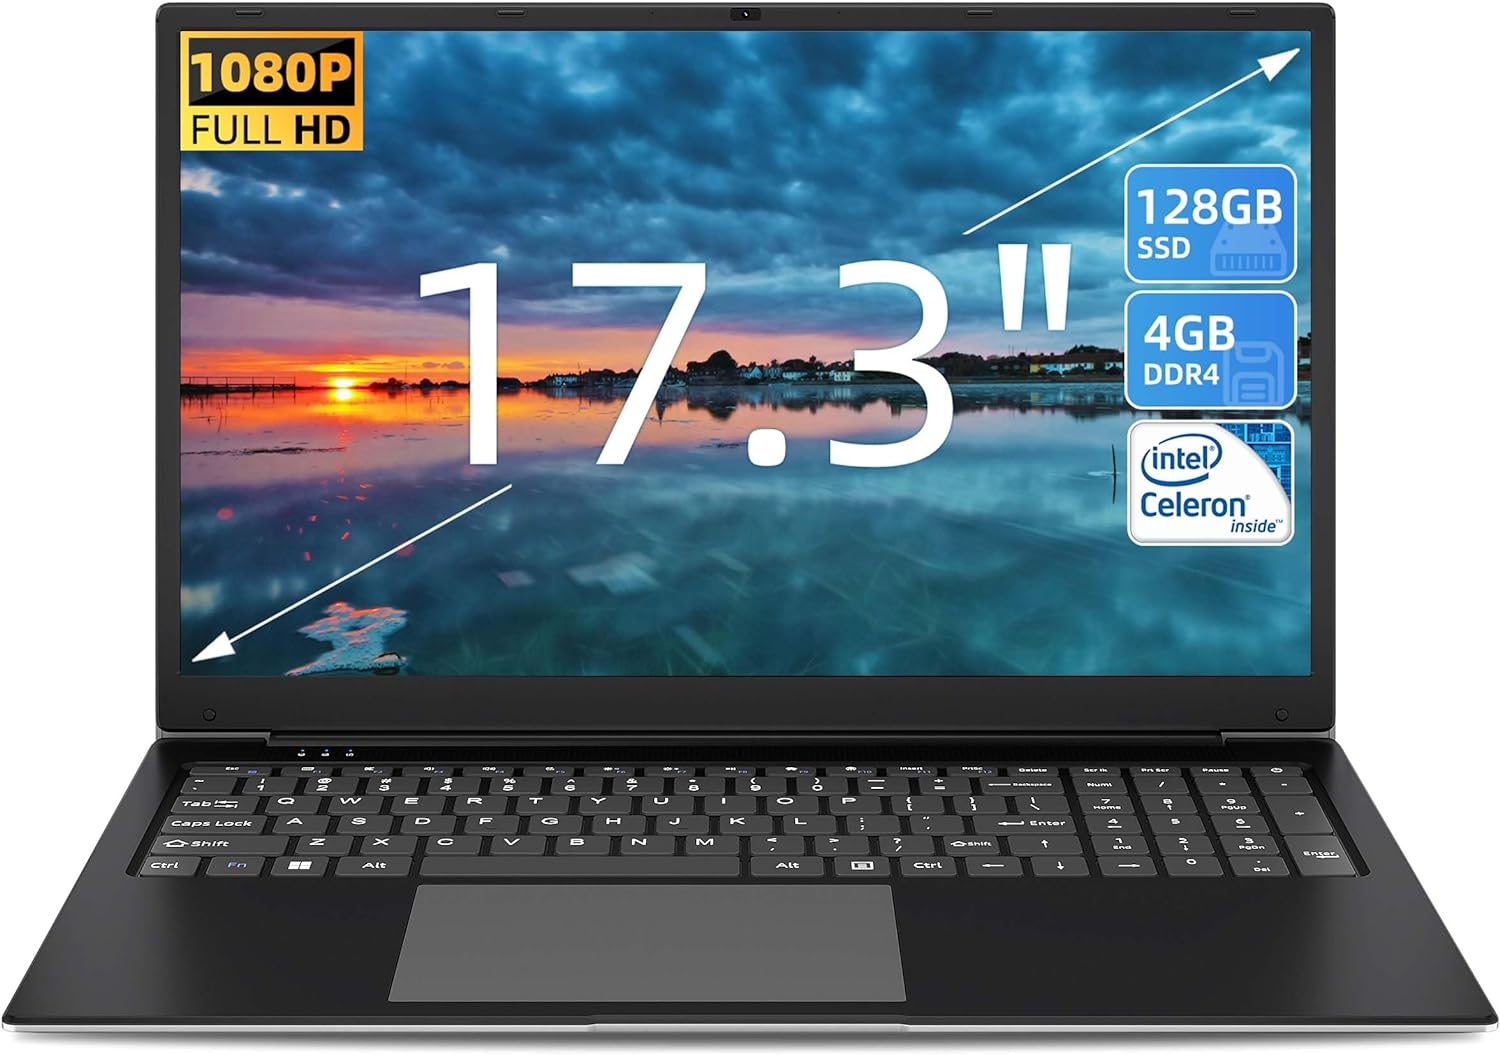 Naclud Laptop, 17 Inch Notebook, 4GB RAM 128GB SSD Laptops Computer, 1920 * 1080 IPS Display, Intel Celeron Quad-Core Processor(Up to 2.5GHz), Mini HDMI, Webcam, Wi-Fi, 512GB Expansion